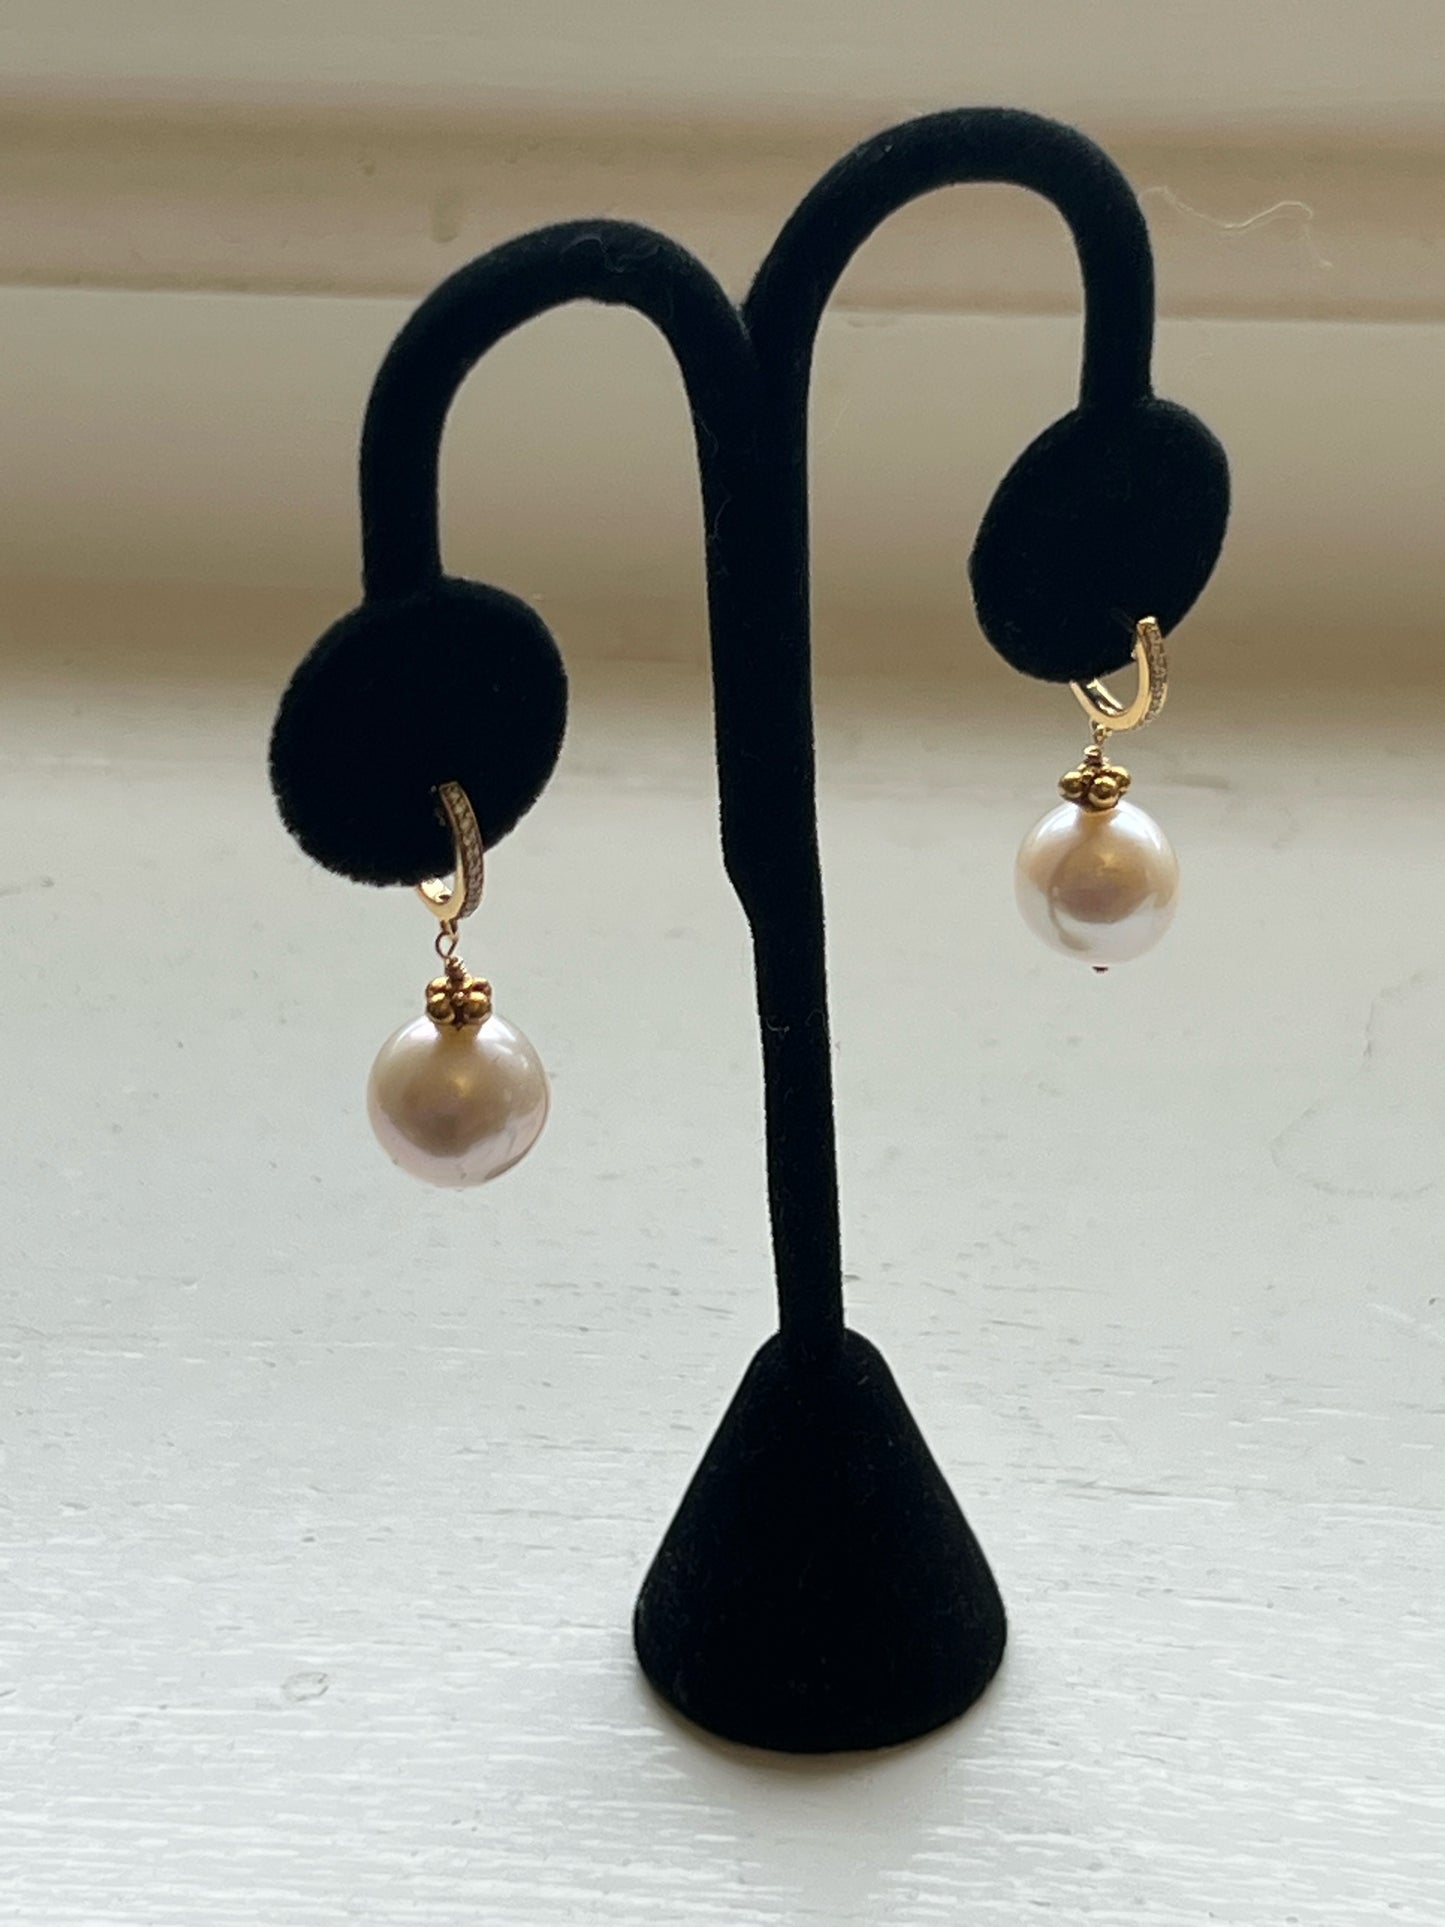 Pearl drop earrings AAA quality set in 18K, 14K and 22KY gold with diamonds